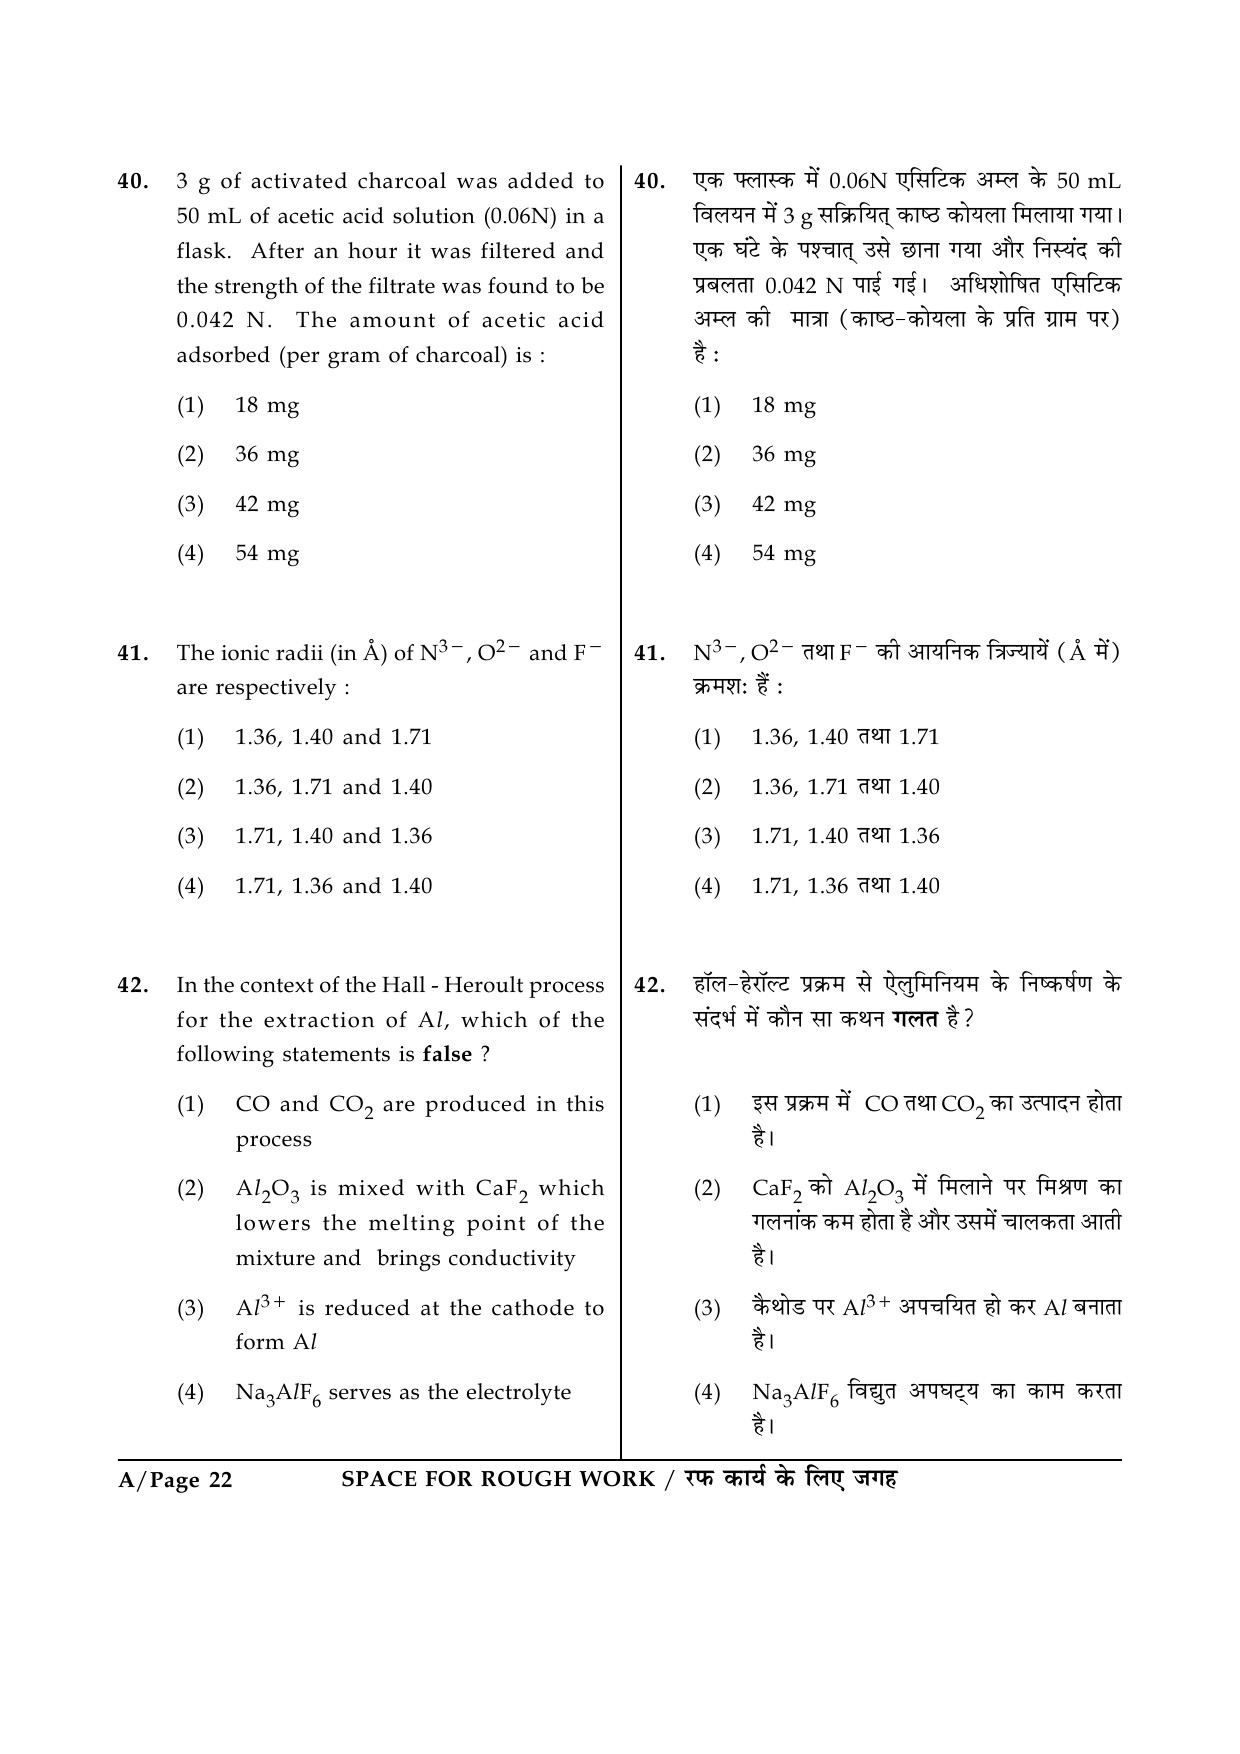 JEE Main Exam Question Paper 2015 Booklet A 22